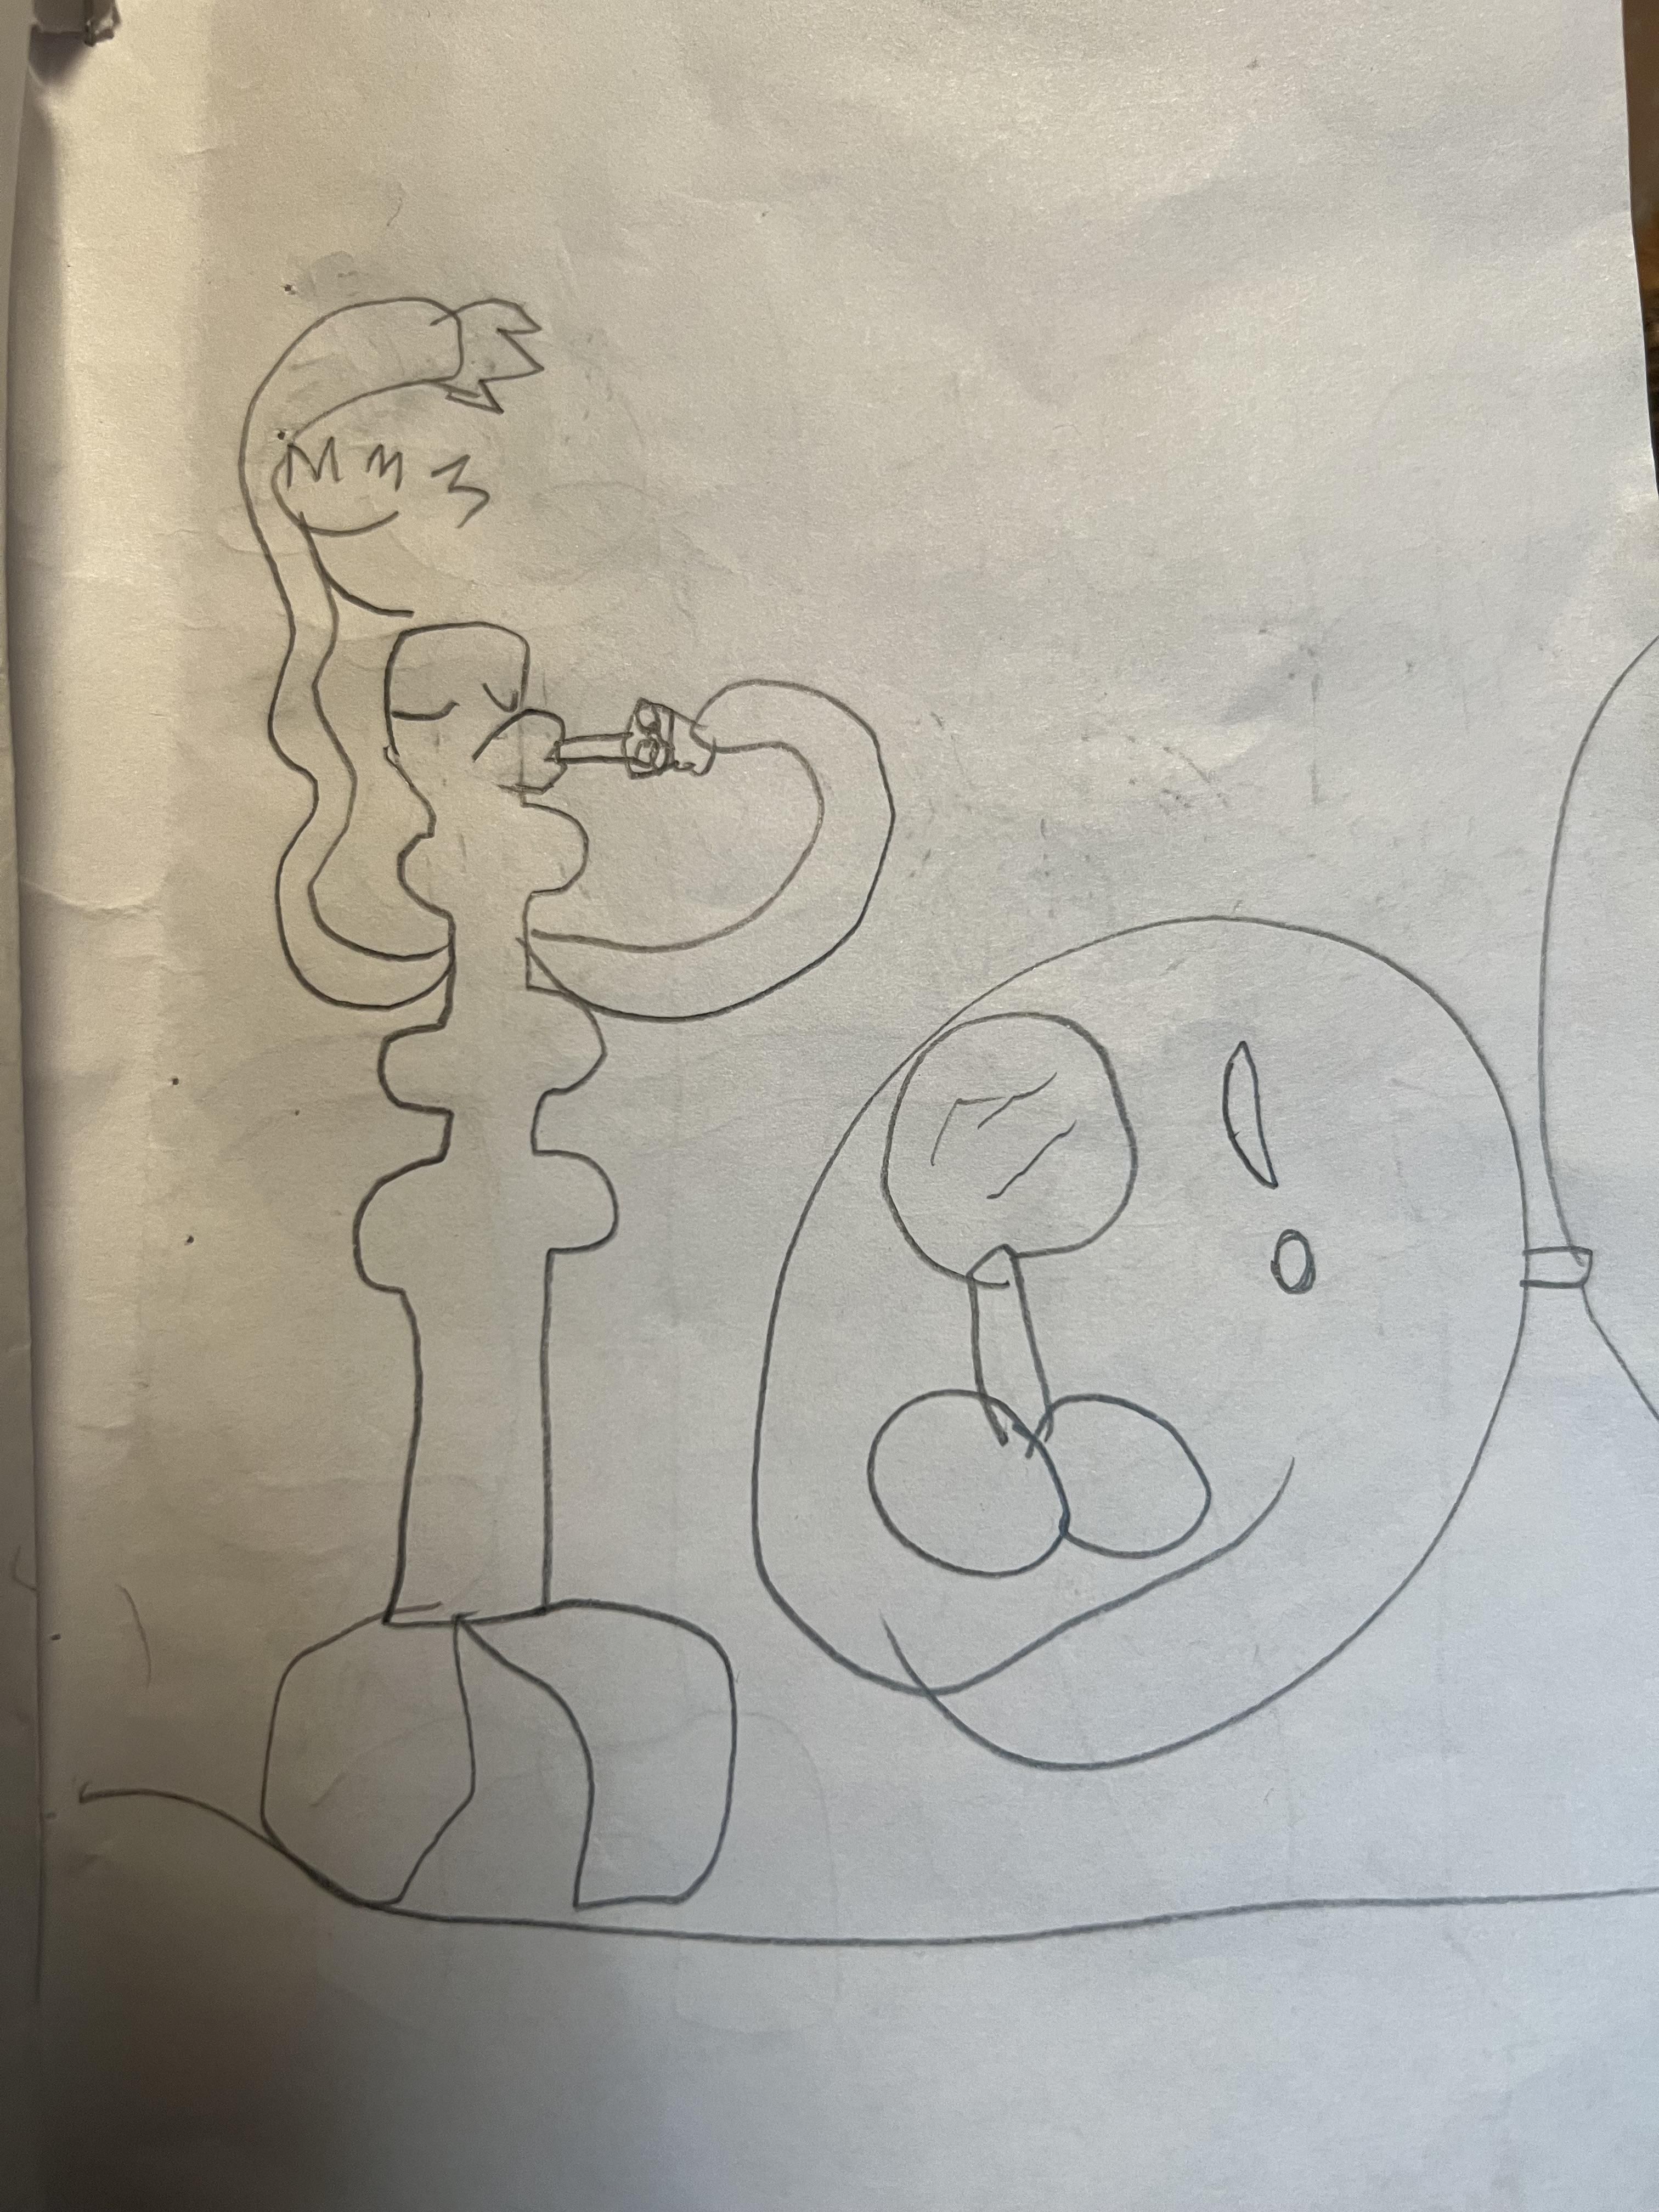 My kid drew a drawing of me eating “chicken wings”.